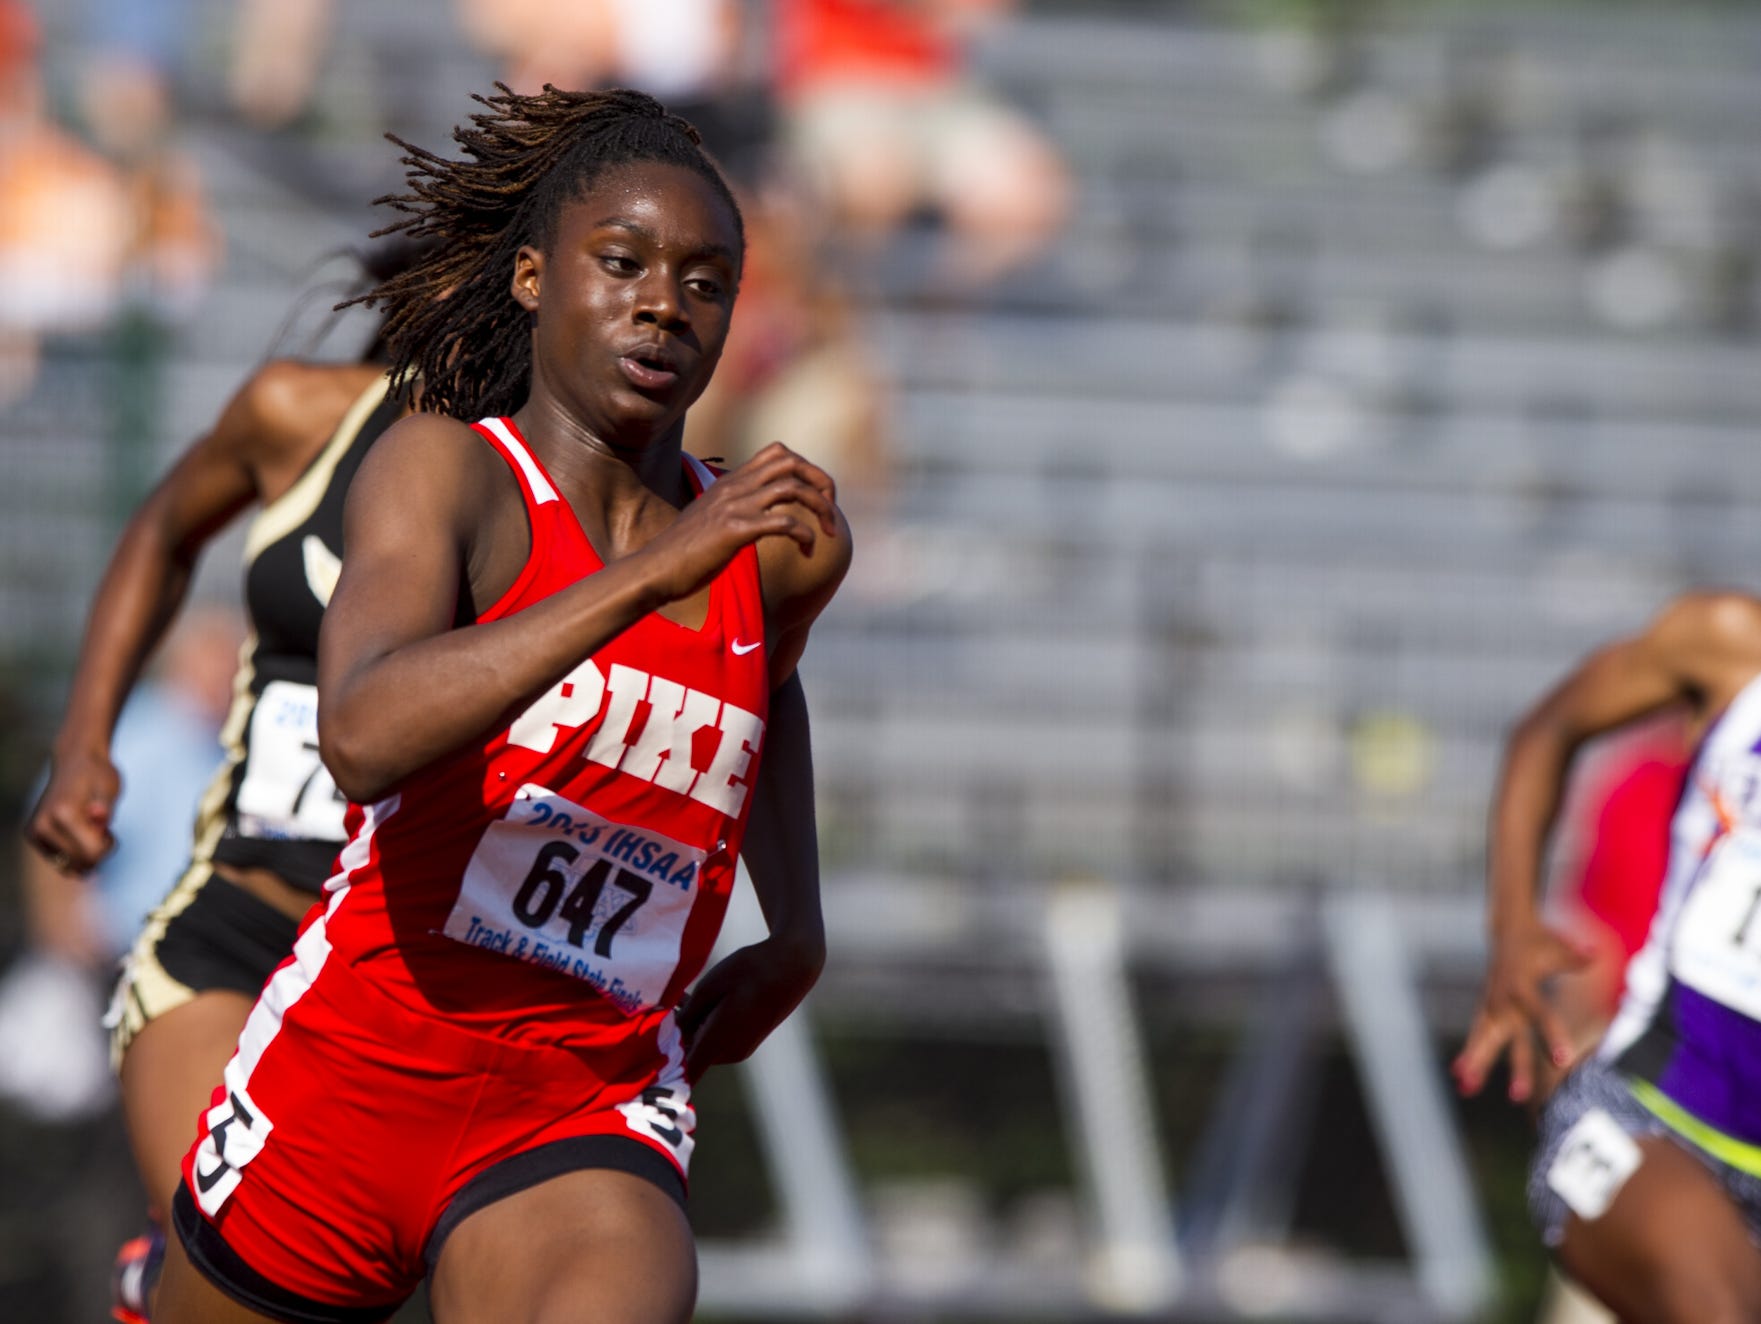 Pike High School sophomore Lynna Irby (647) competes in the 200 Meter Dash. The 42nd Annual Girl's Track and Field State Finals were held Saturday, June 6, 2015, at the Robert C. Haugh Track and Field Complex on the campus of Indiana University in Bloomington, Ind.